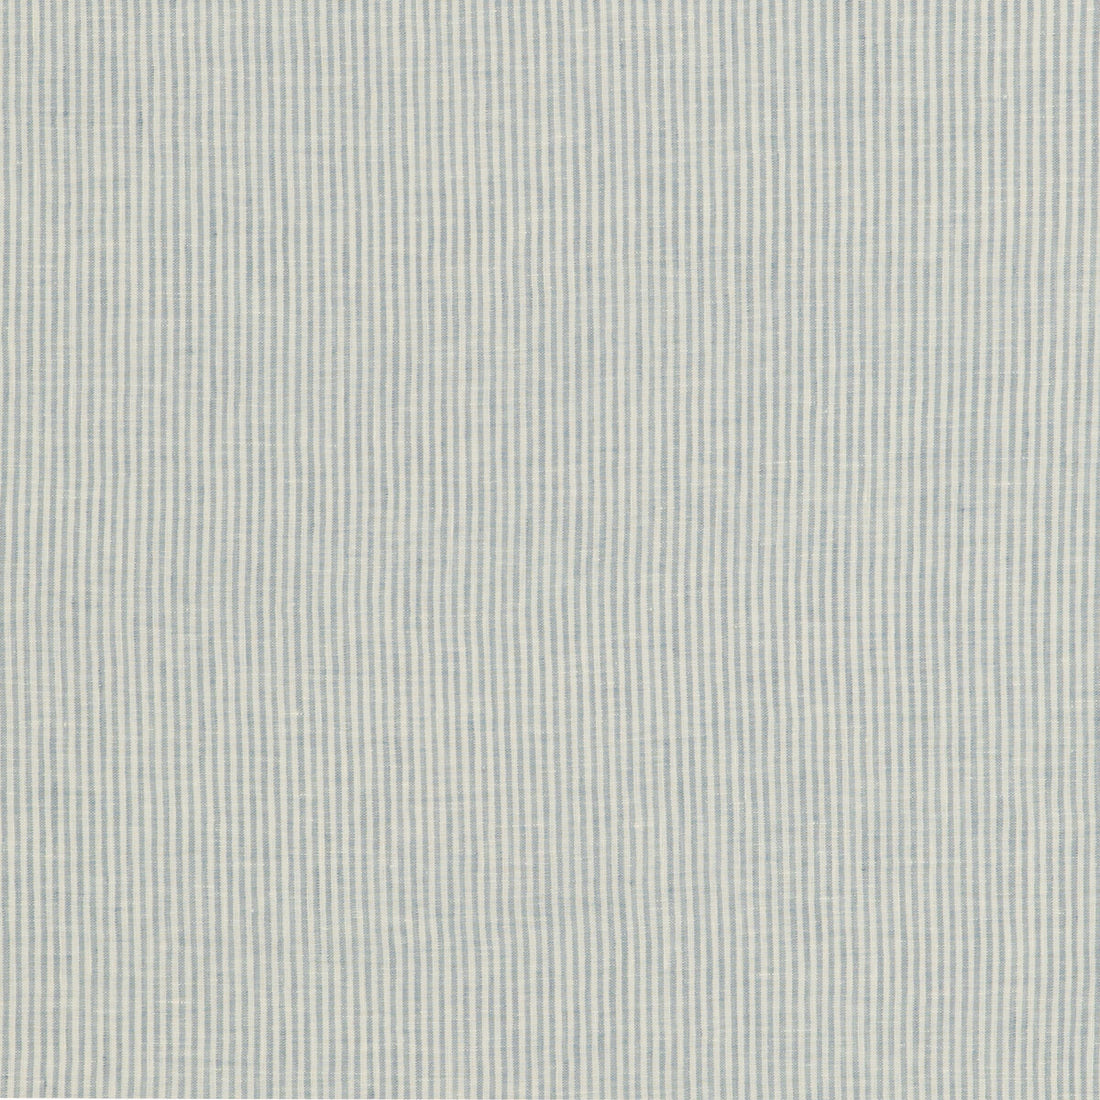 Nala Ticking fabric in sky color - pattern ED85331.602.0 - by Threads in the Nala Linens collection